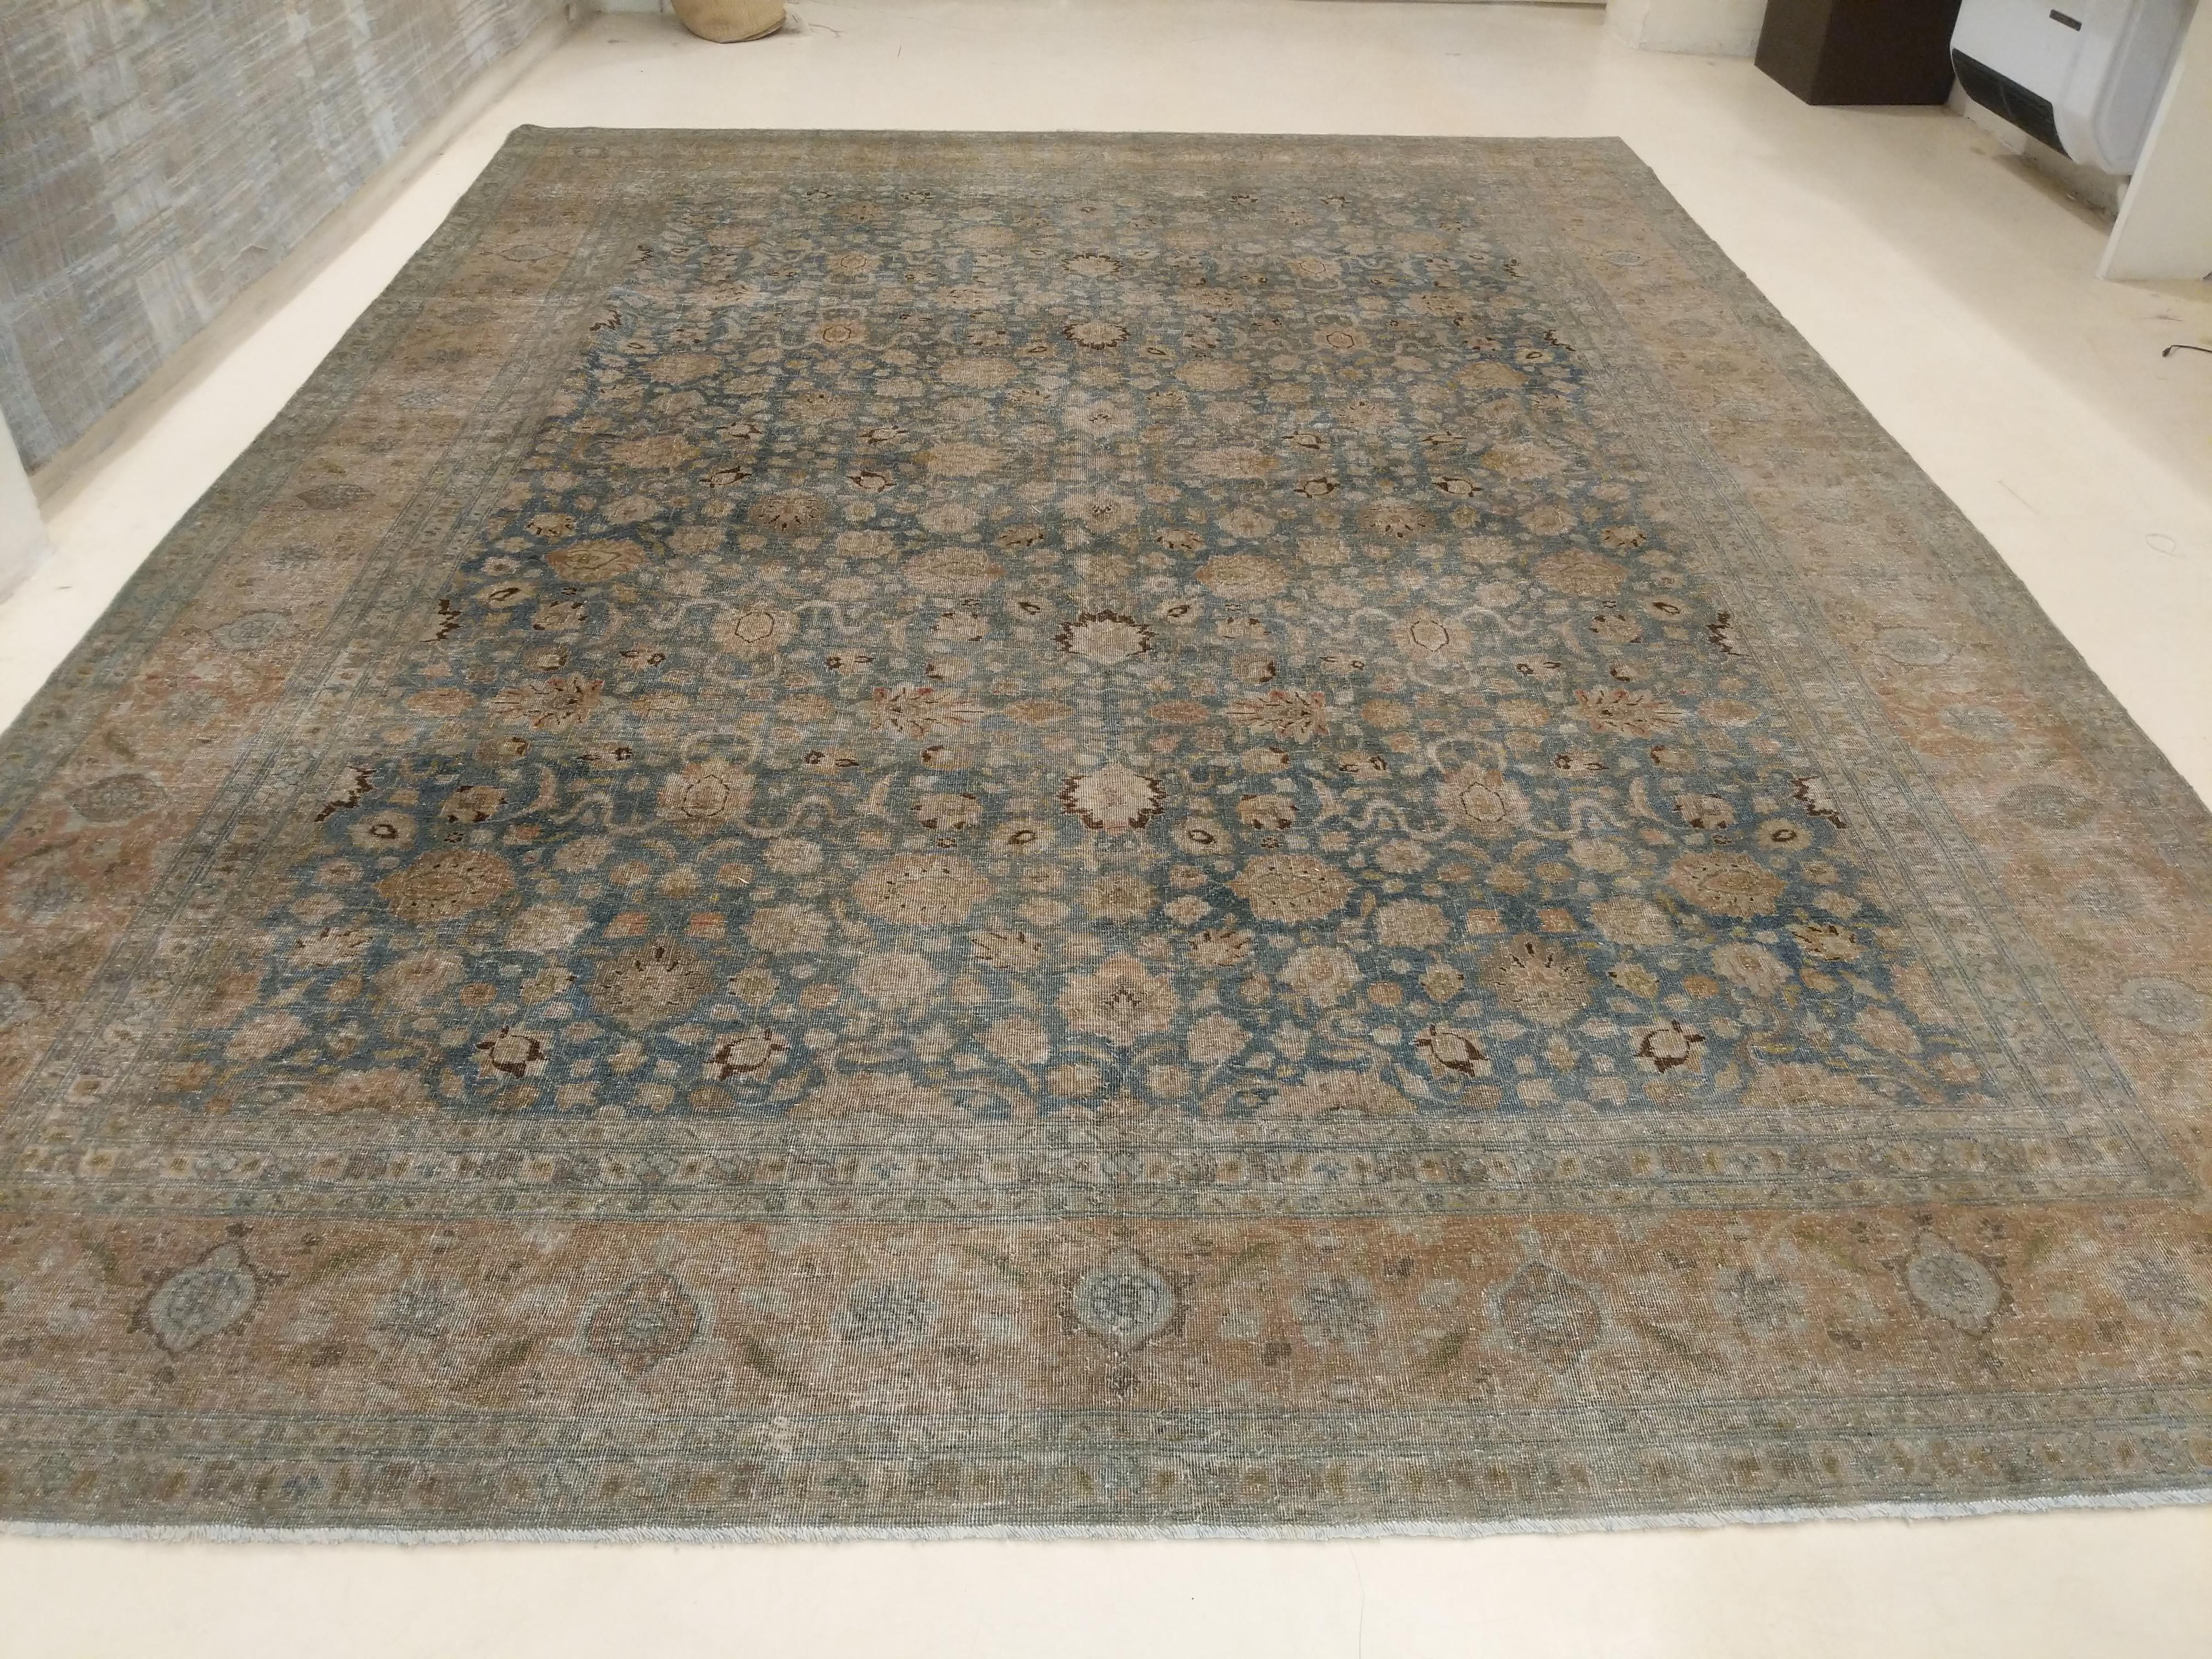 Turkish Large Fine Vintage Anatolian Soft Teal Shabby Chic All-Over Design Rug